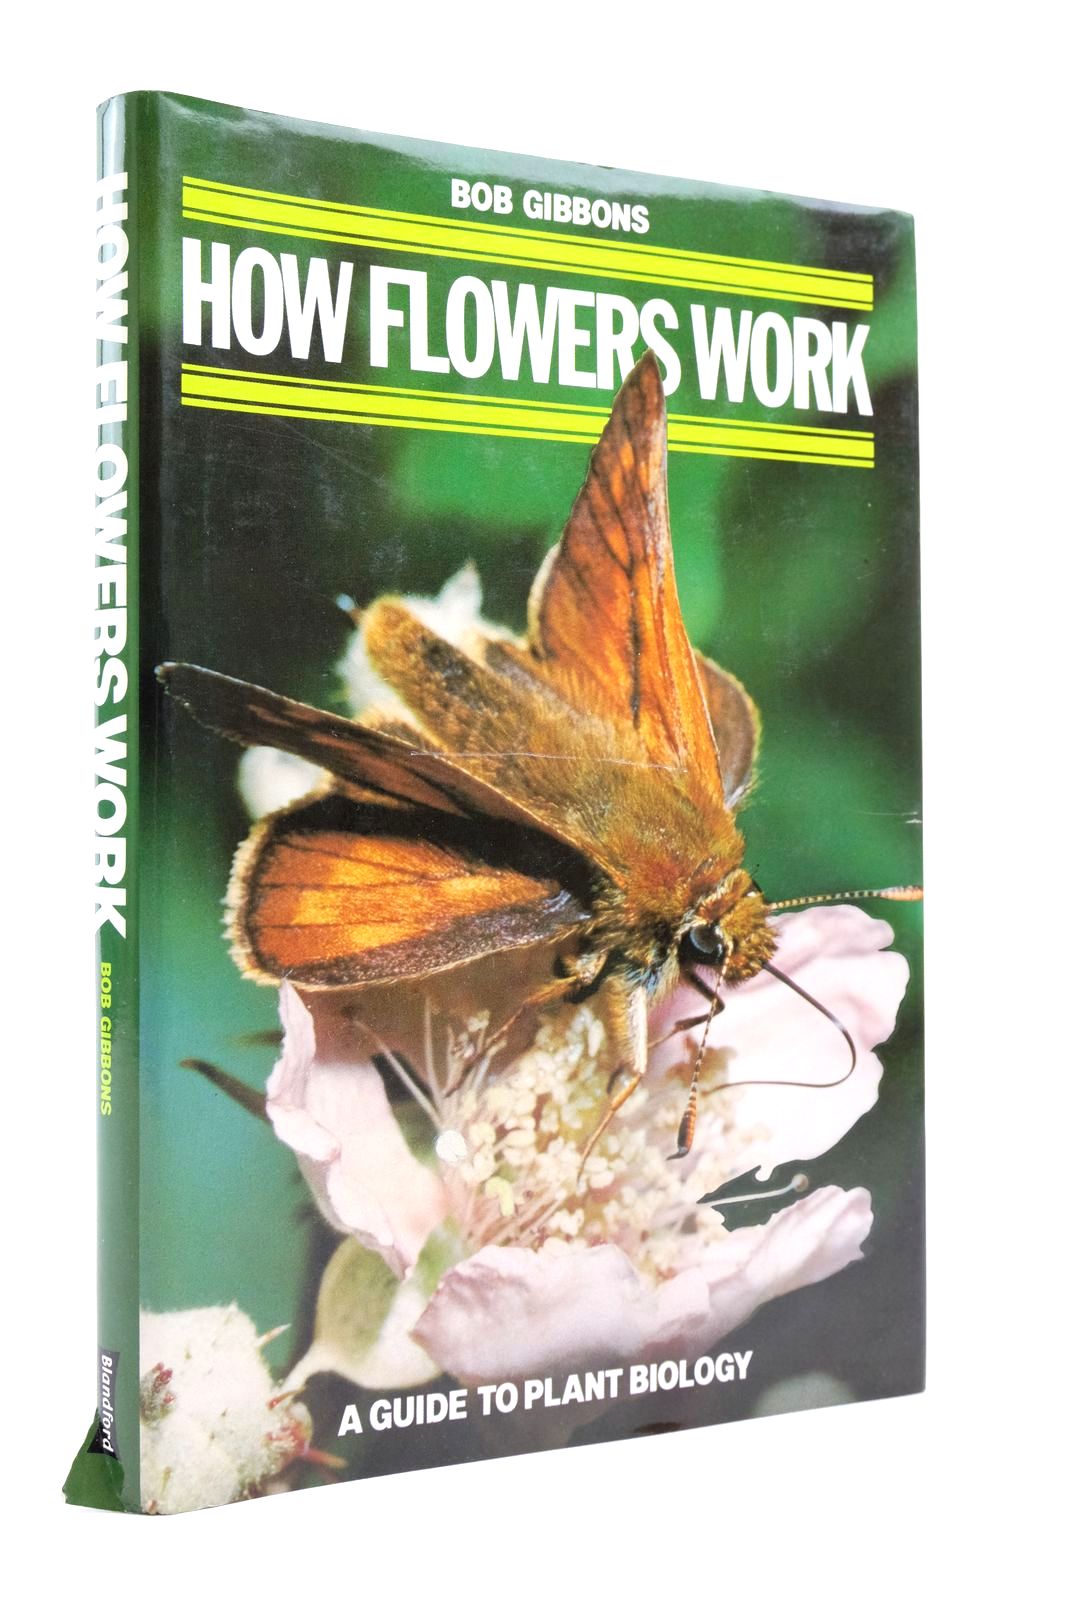 Photo of HOW FLOWERS WORK: A GUIDE TO PLANT BIOLOGY written by Gibbons, Bob illustrated by Luff, Vanessa published by Blandford Press (STOCK CODE: 2139125)  for sale by Stella & Rose's Books